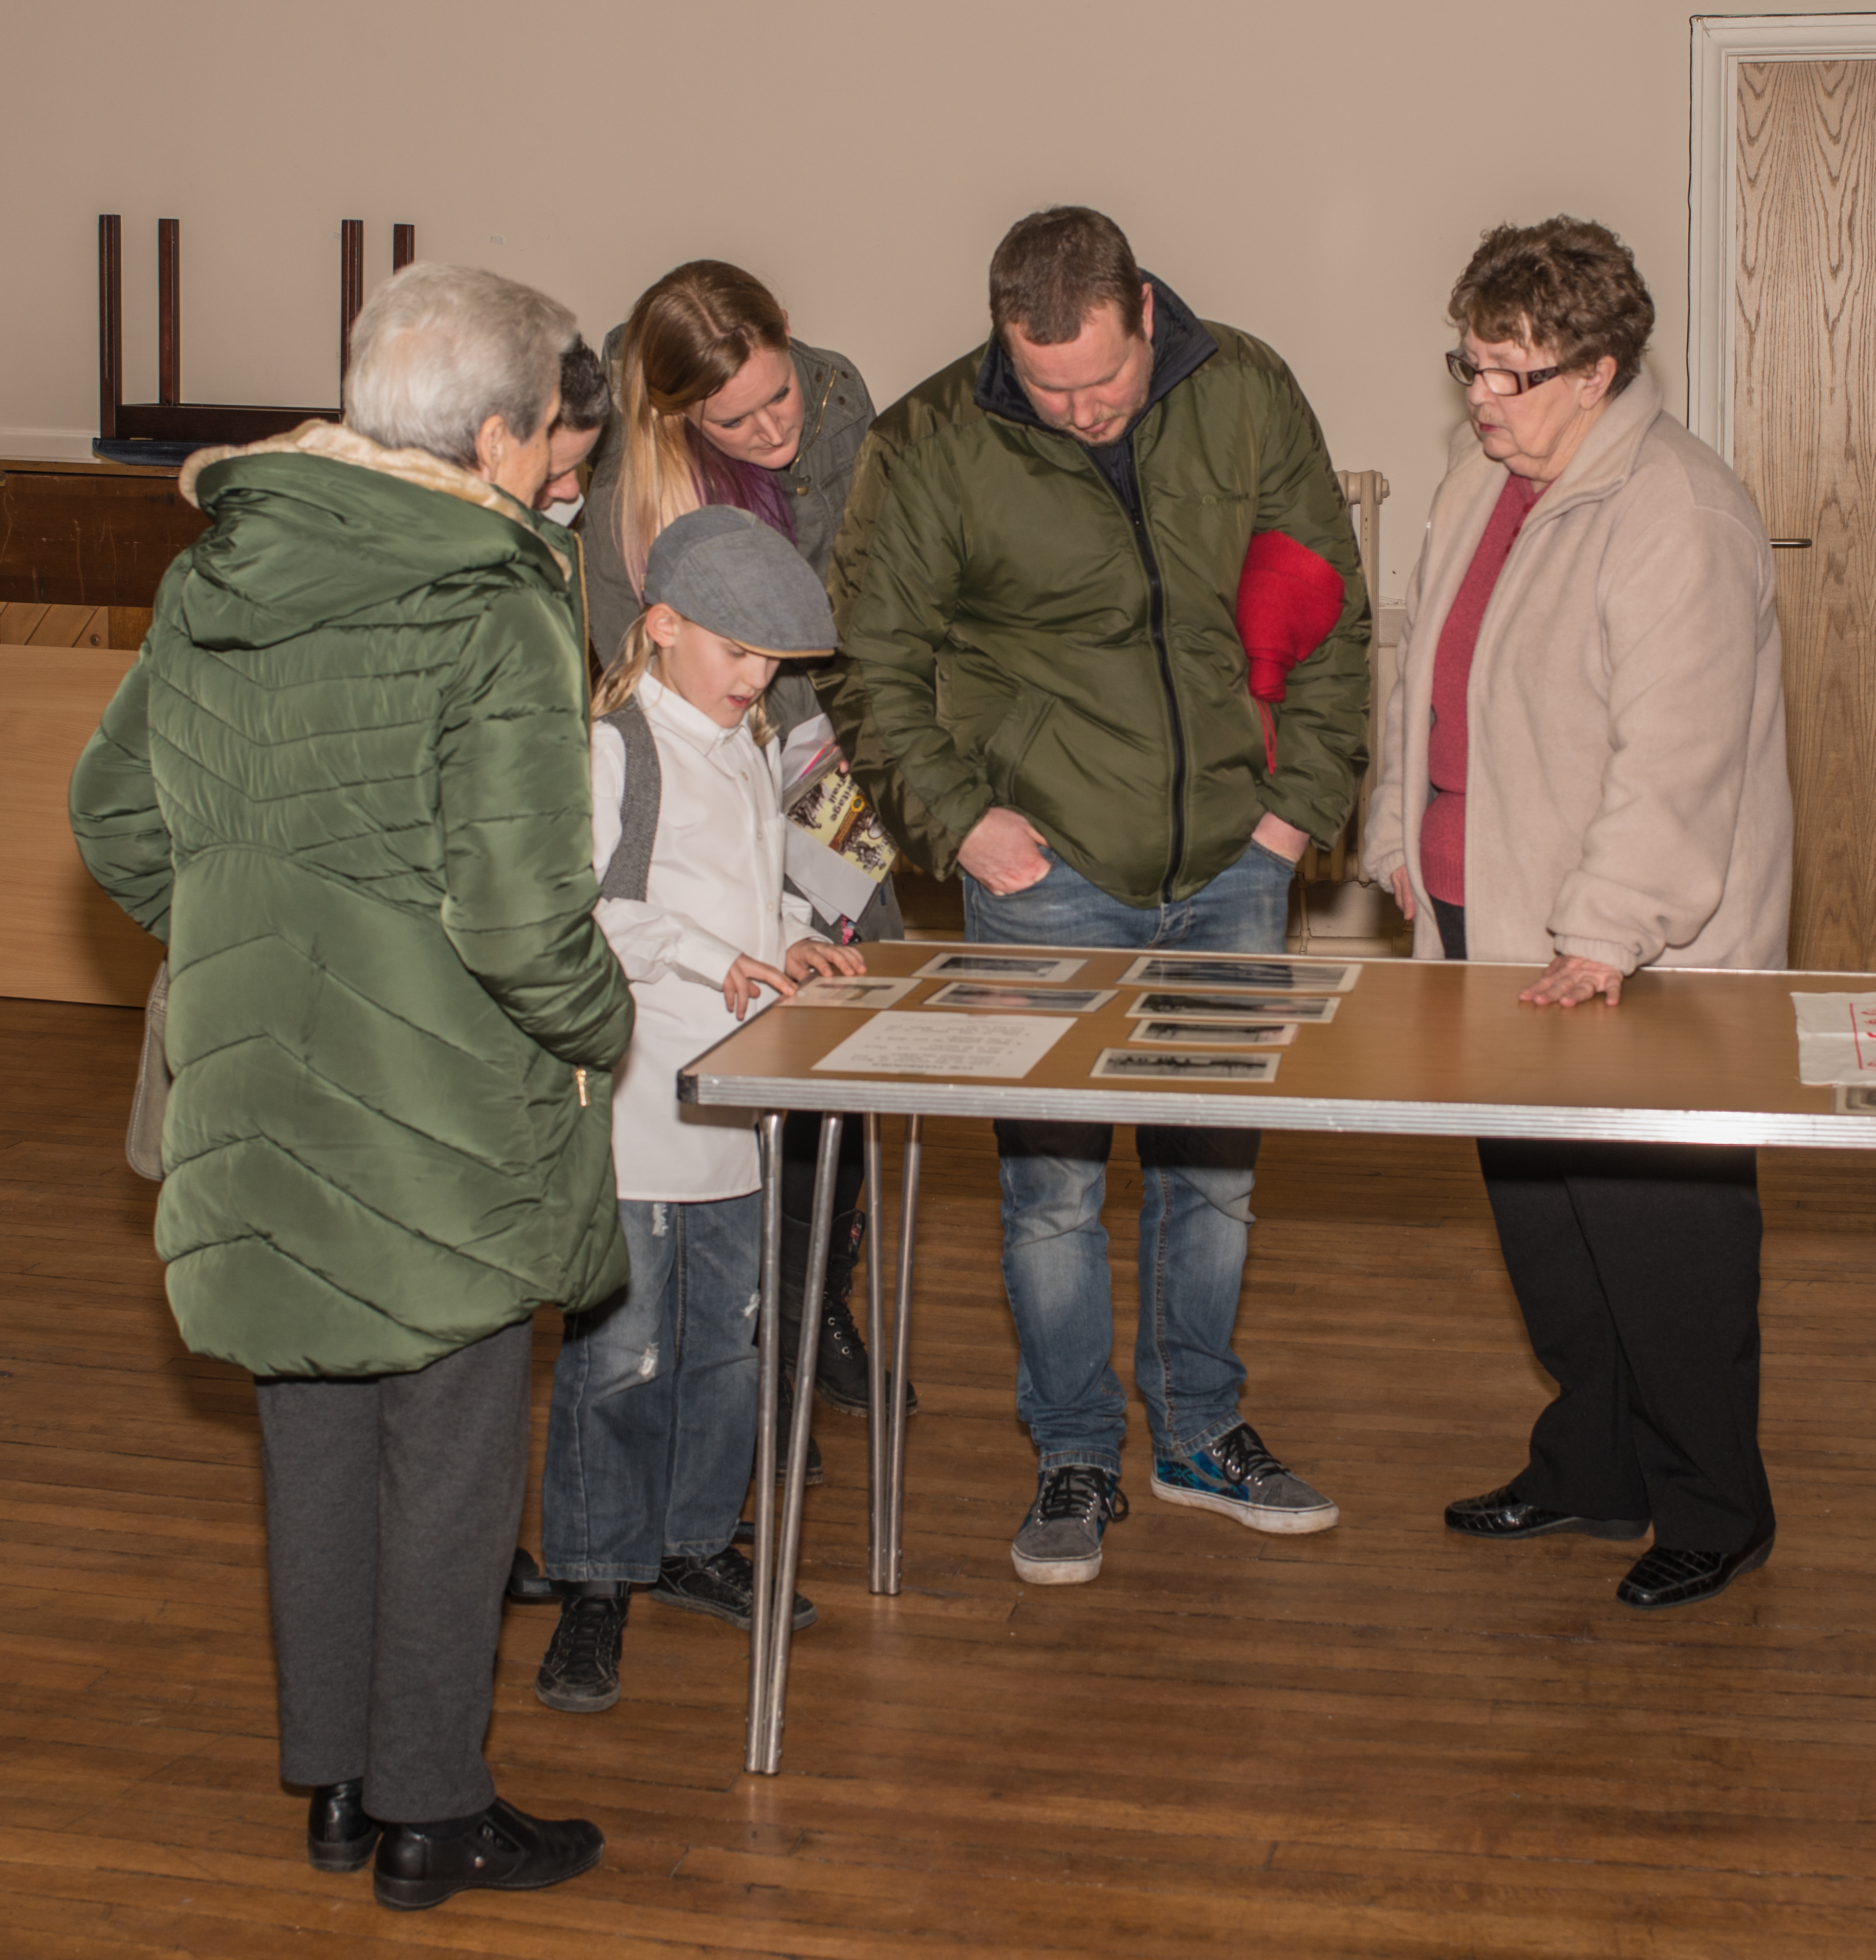 The project launch, examining the artefacts